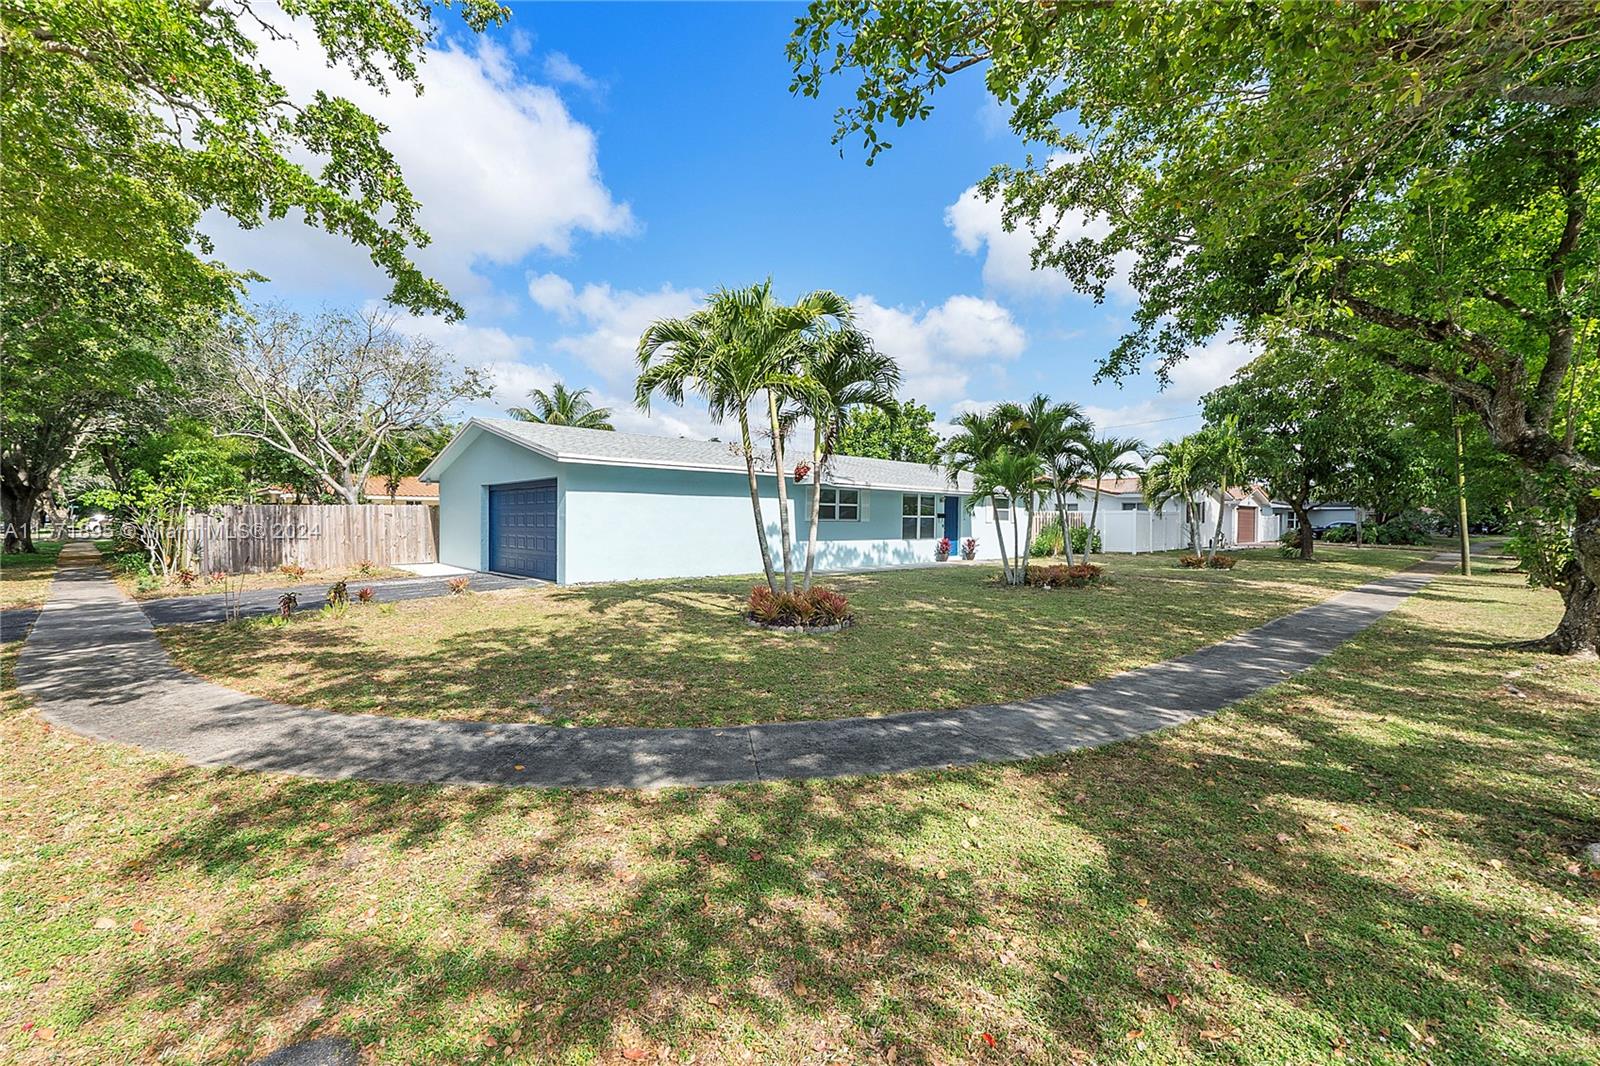 281 SW 52nd Ave, Plantation, Florida 33317, 4 Bedrooms Bedrooms, ,2 BathroomsBathrooms,Residential,For Sale,281 SW 52nd Ave,A11571895